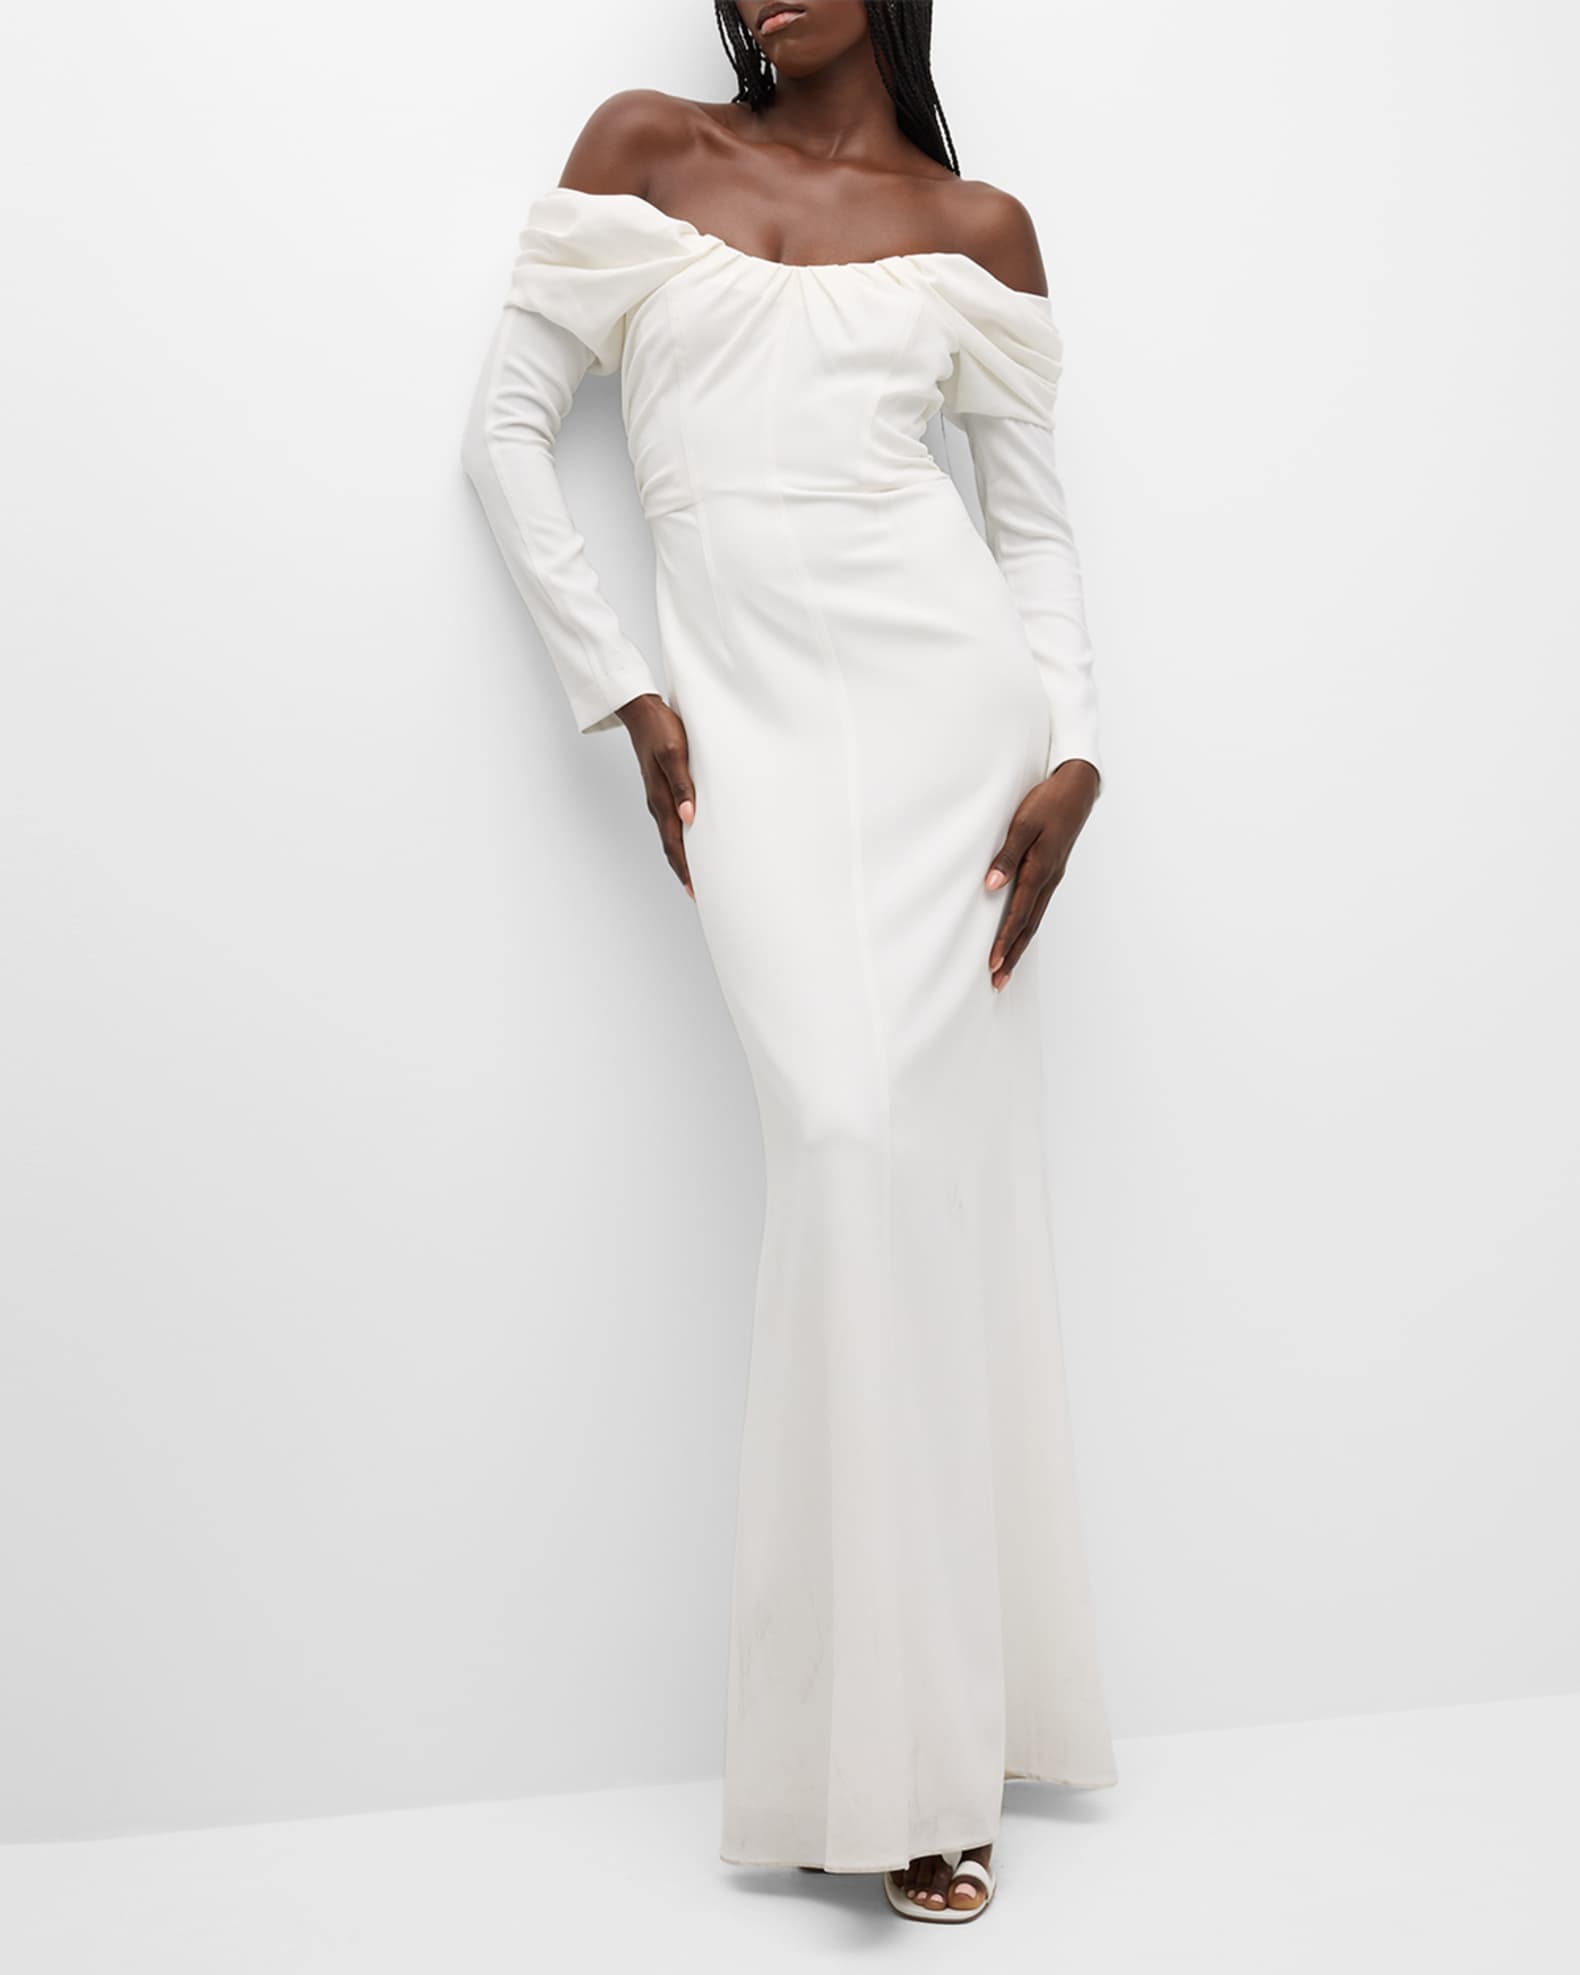 A.L.C. Nora Draped Off-The-Shoulder Gown